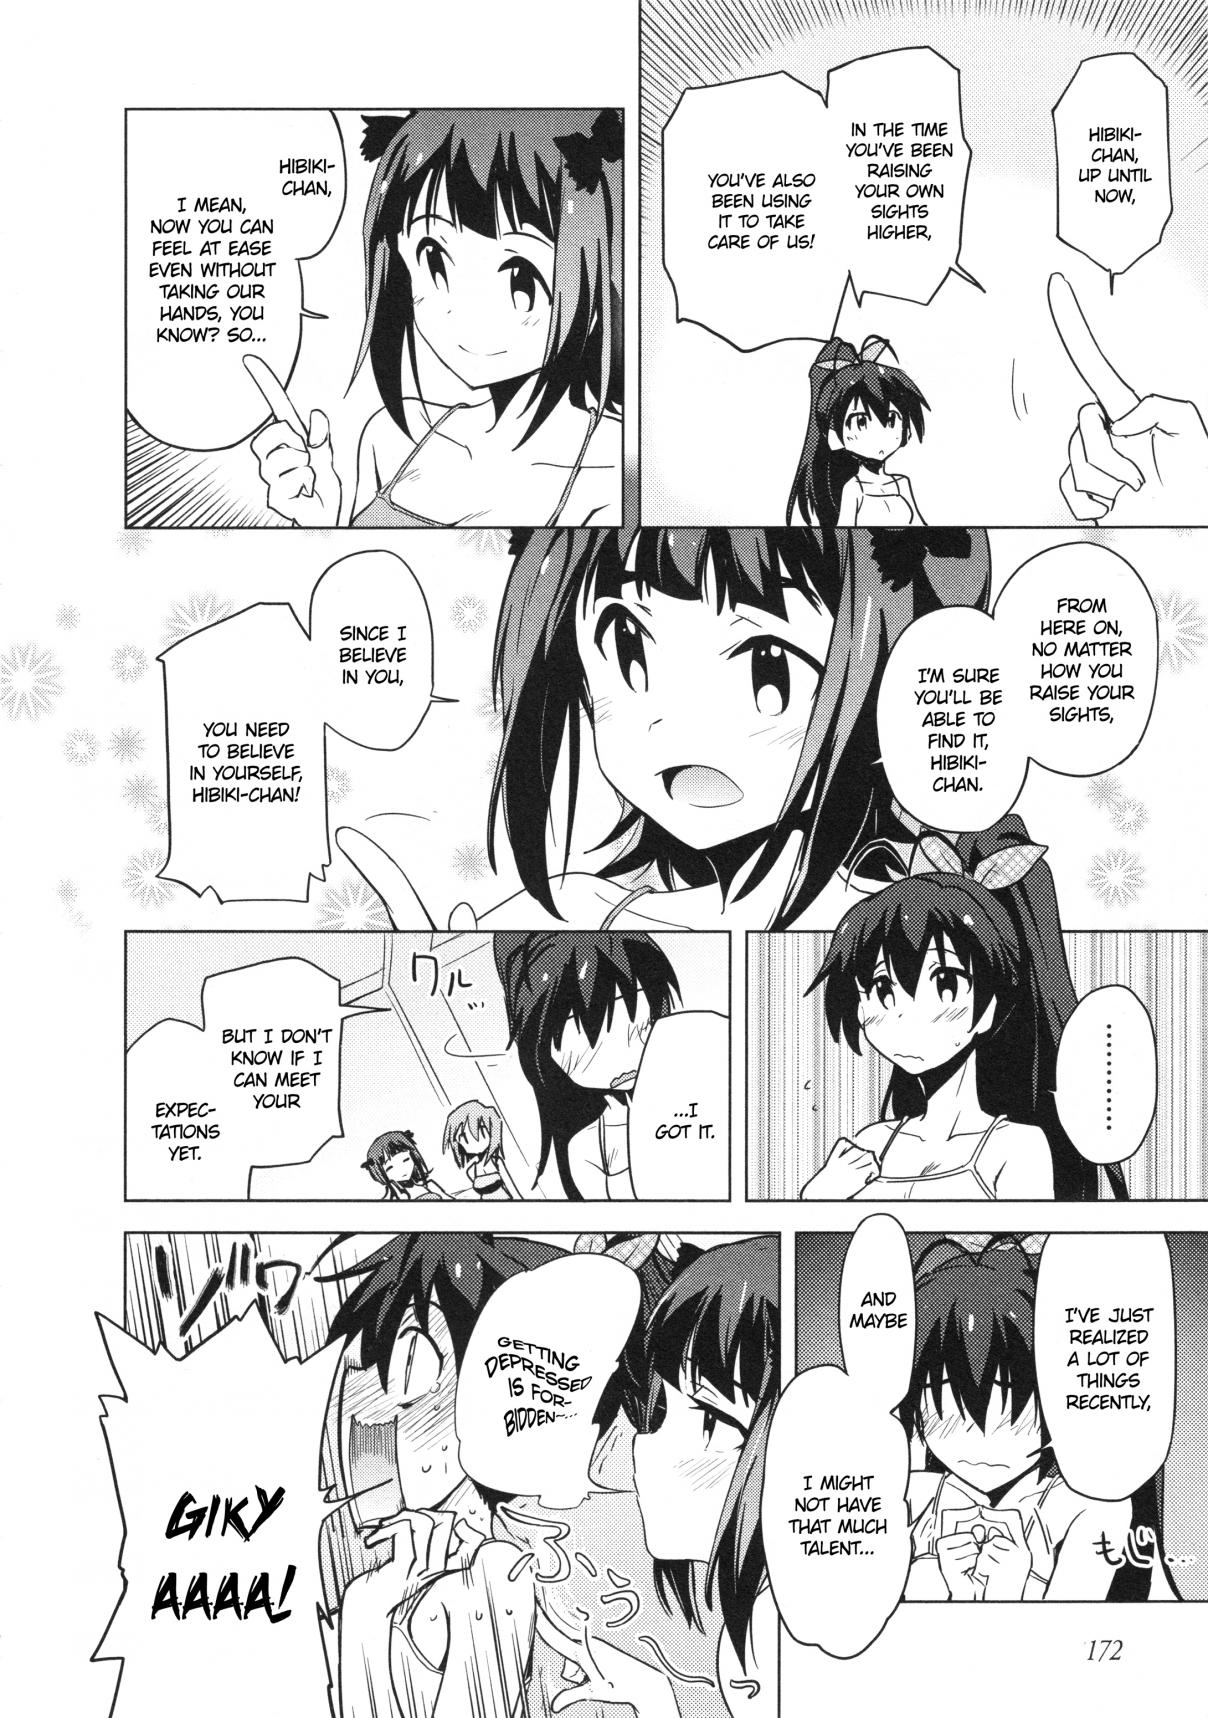 THE iDOLM@STER 2 The world is all one!! Vol. 4 Ch. 27 Next Case